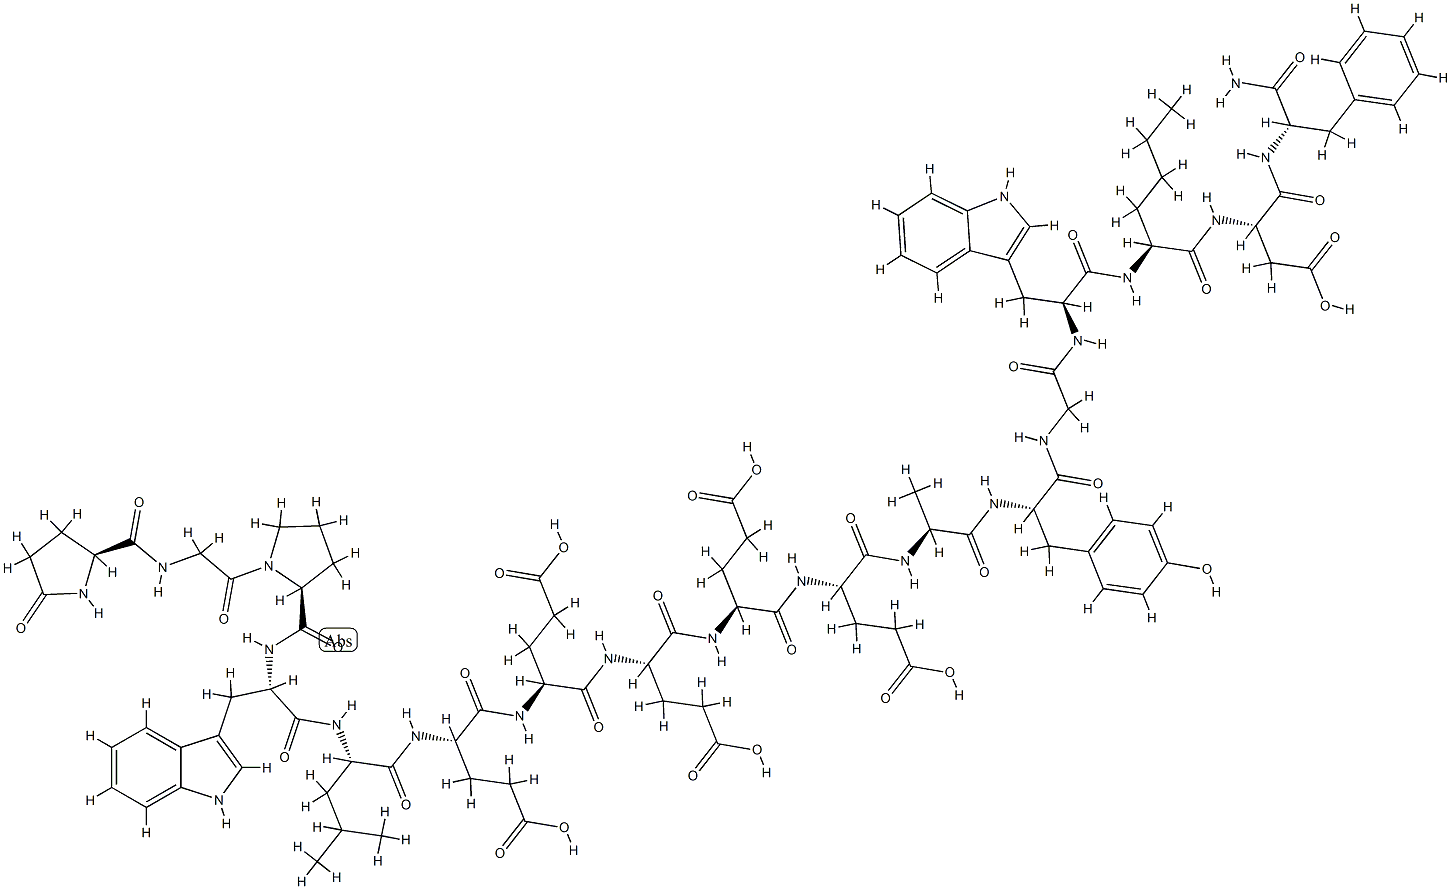 gastrin heptadecapeptide, Nle(15)- 구조식 이미지